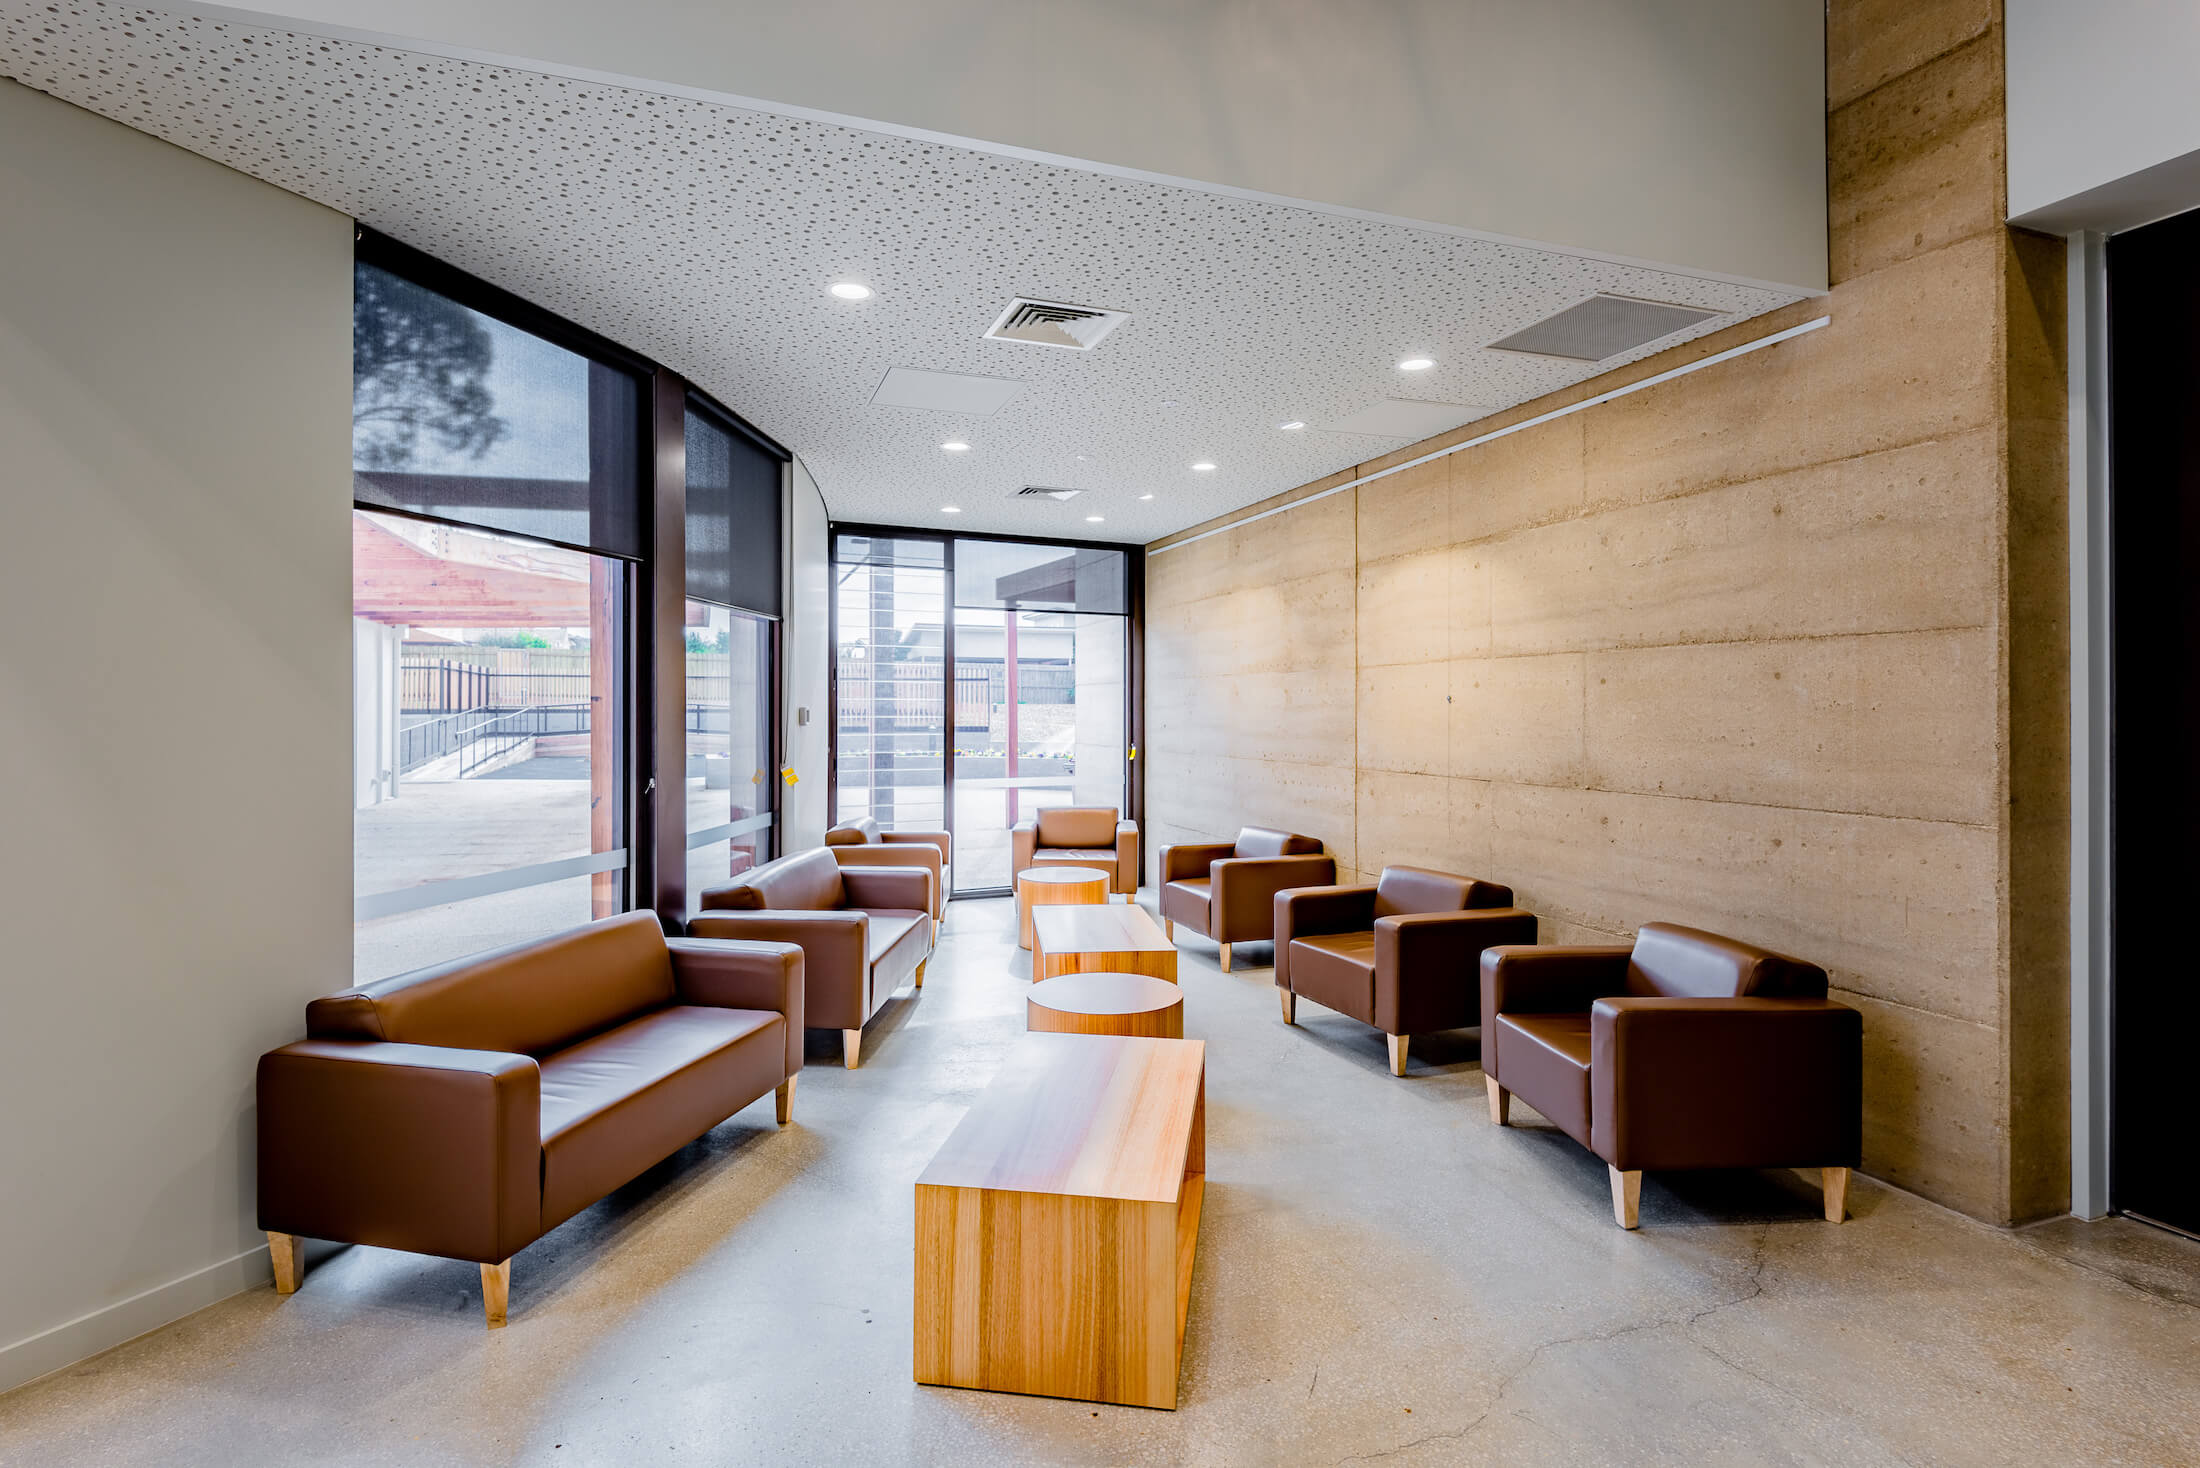 Leather look lounges and timber coffee tables in seating nook overlooking courtyard